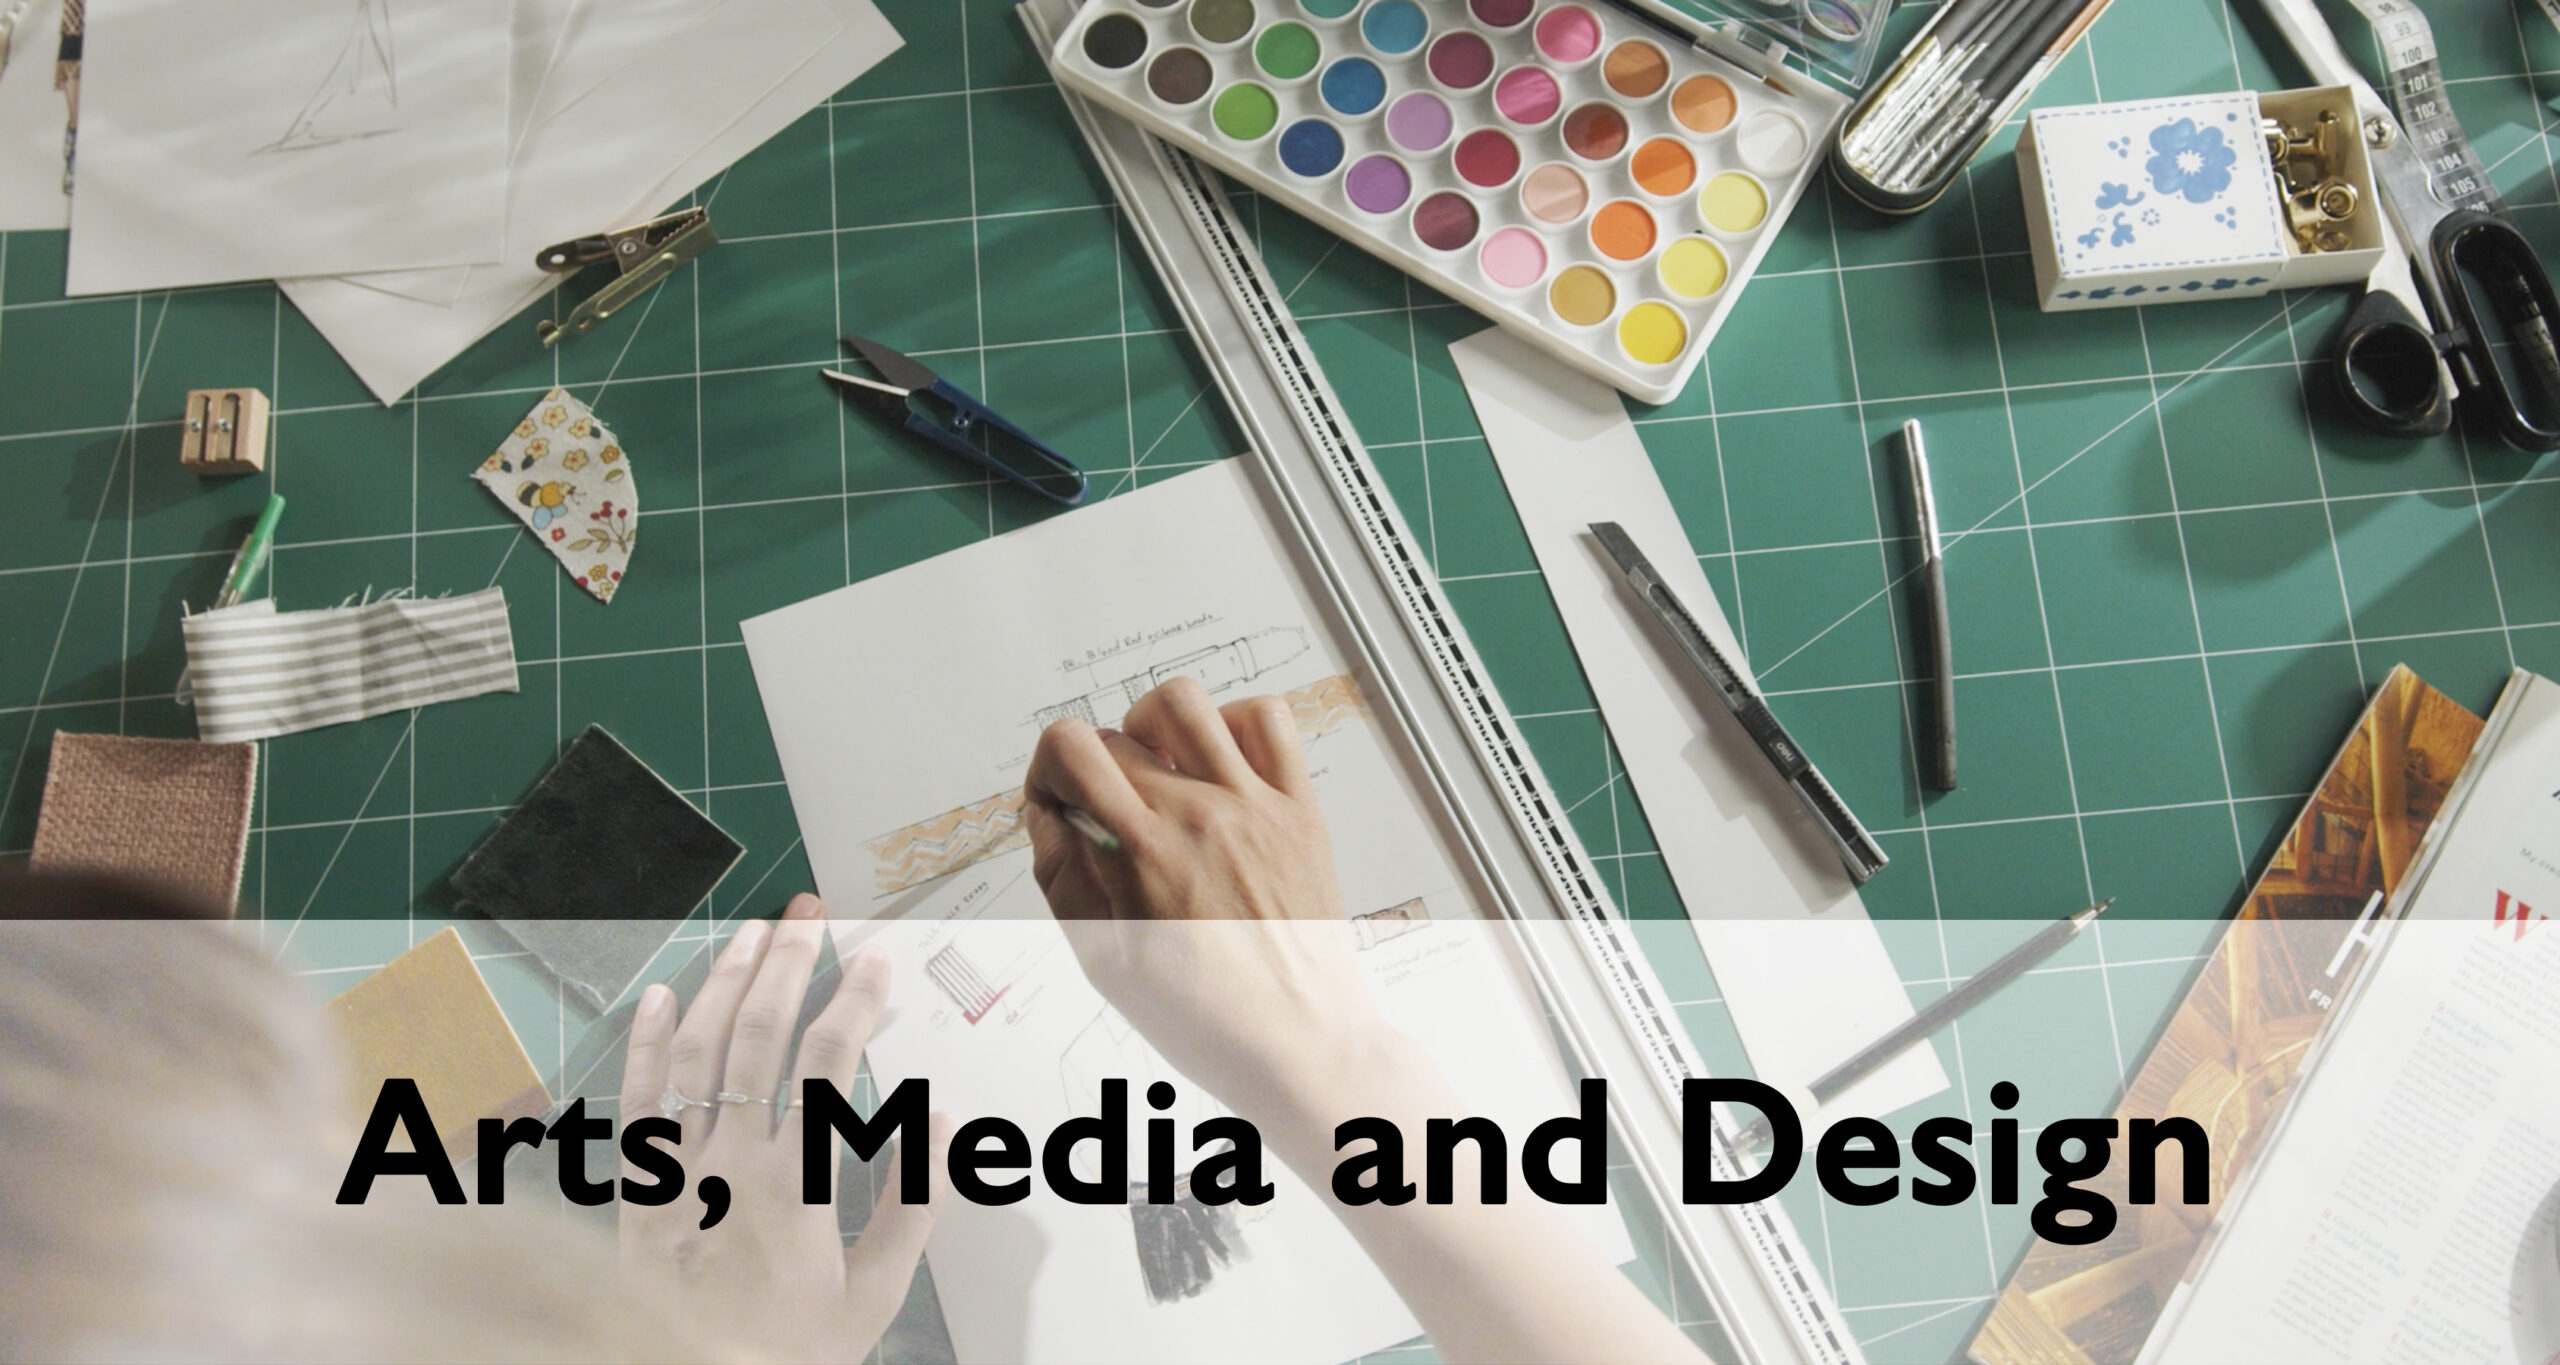 Click image to get to the Arts, Media, and Design pathway web page.